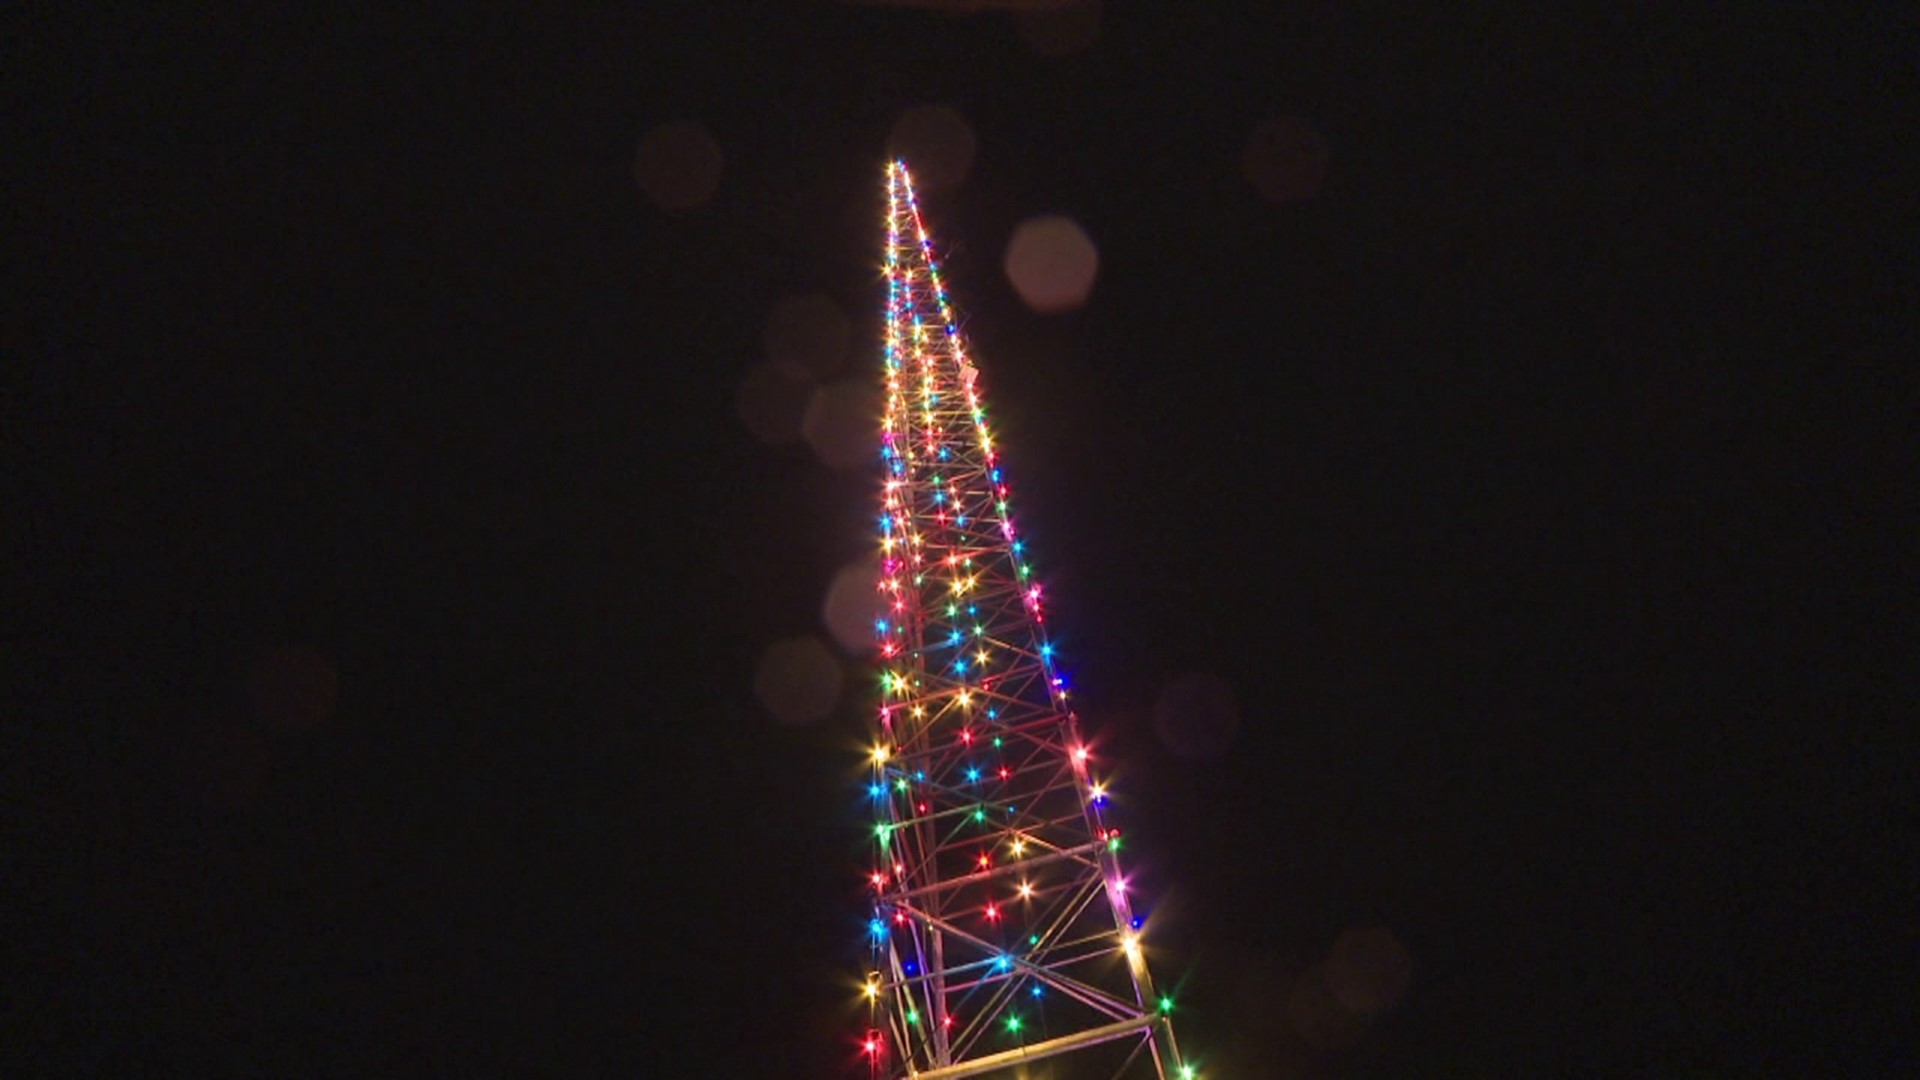 The holiday season is officially underway in Scranton as the switch was flipped and the WEJL radio tower was lit becoming the region's tallest Christmas tree.